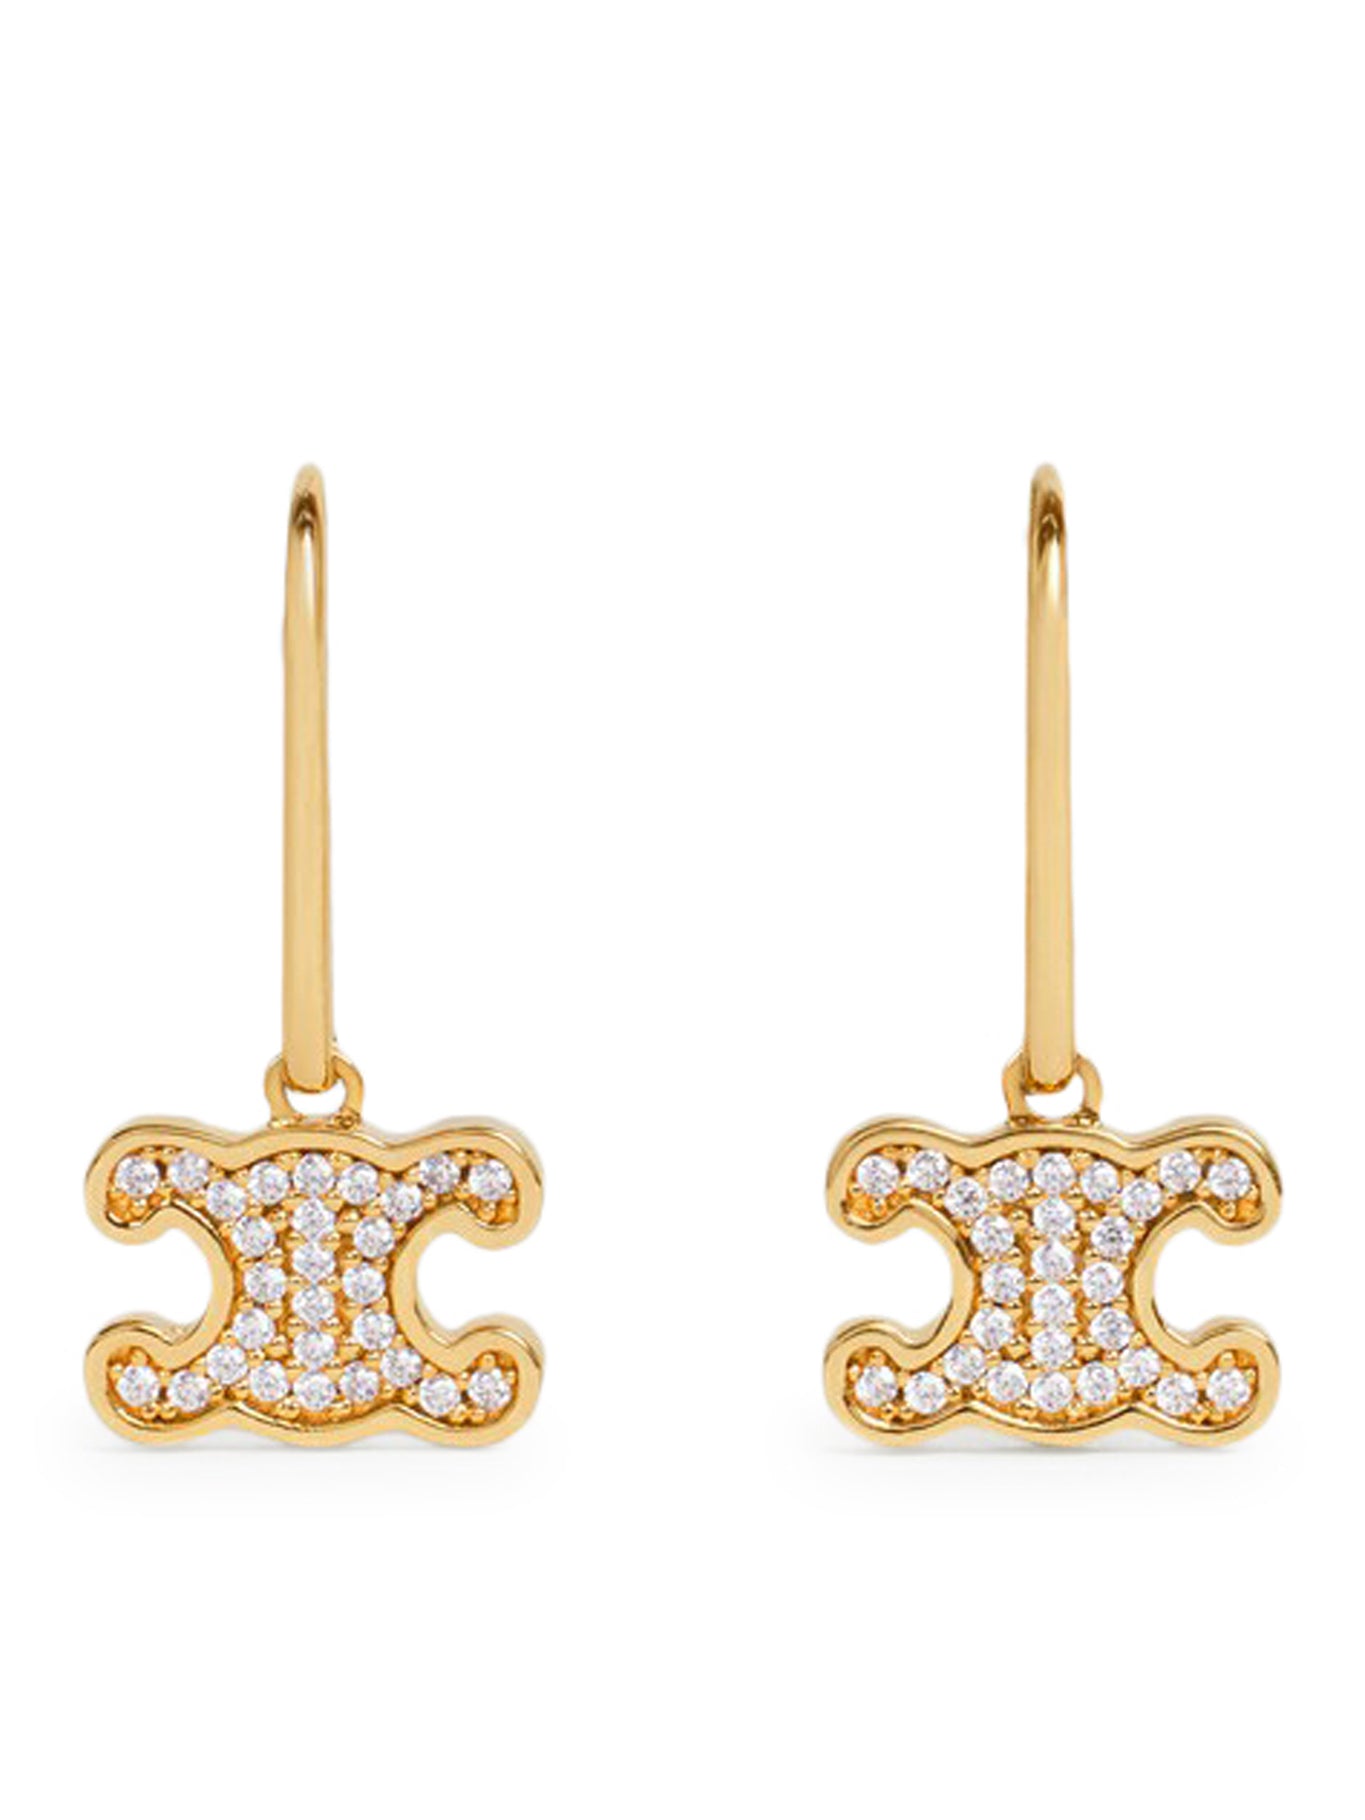 TRIOMPHE EARRINGS WITH BRASS RHINESTONES WITH GOLD FINISH AND GOLD CRYSTALS